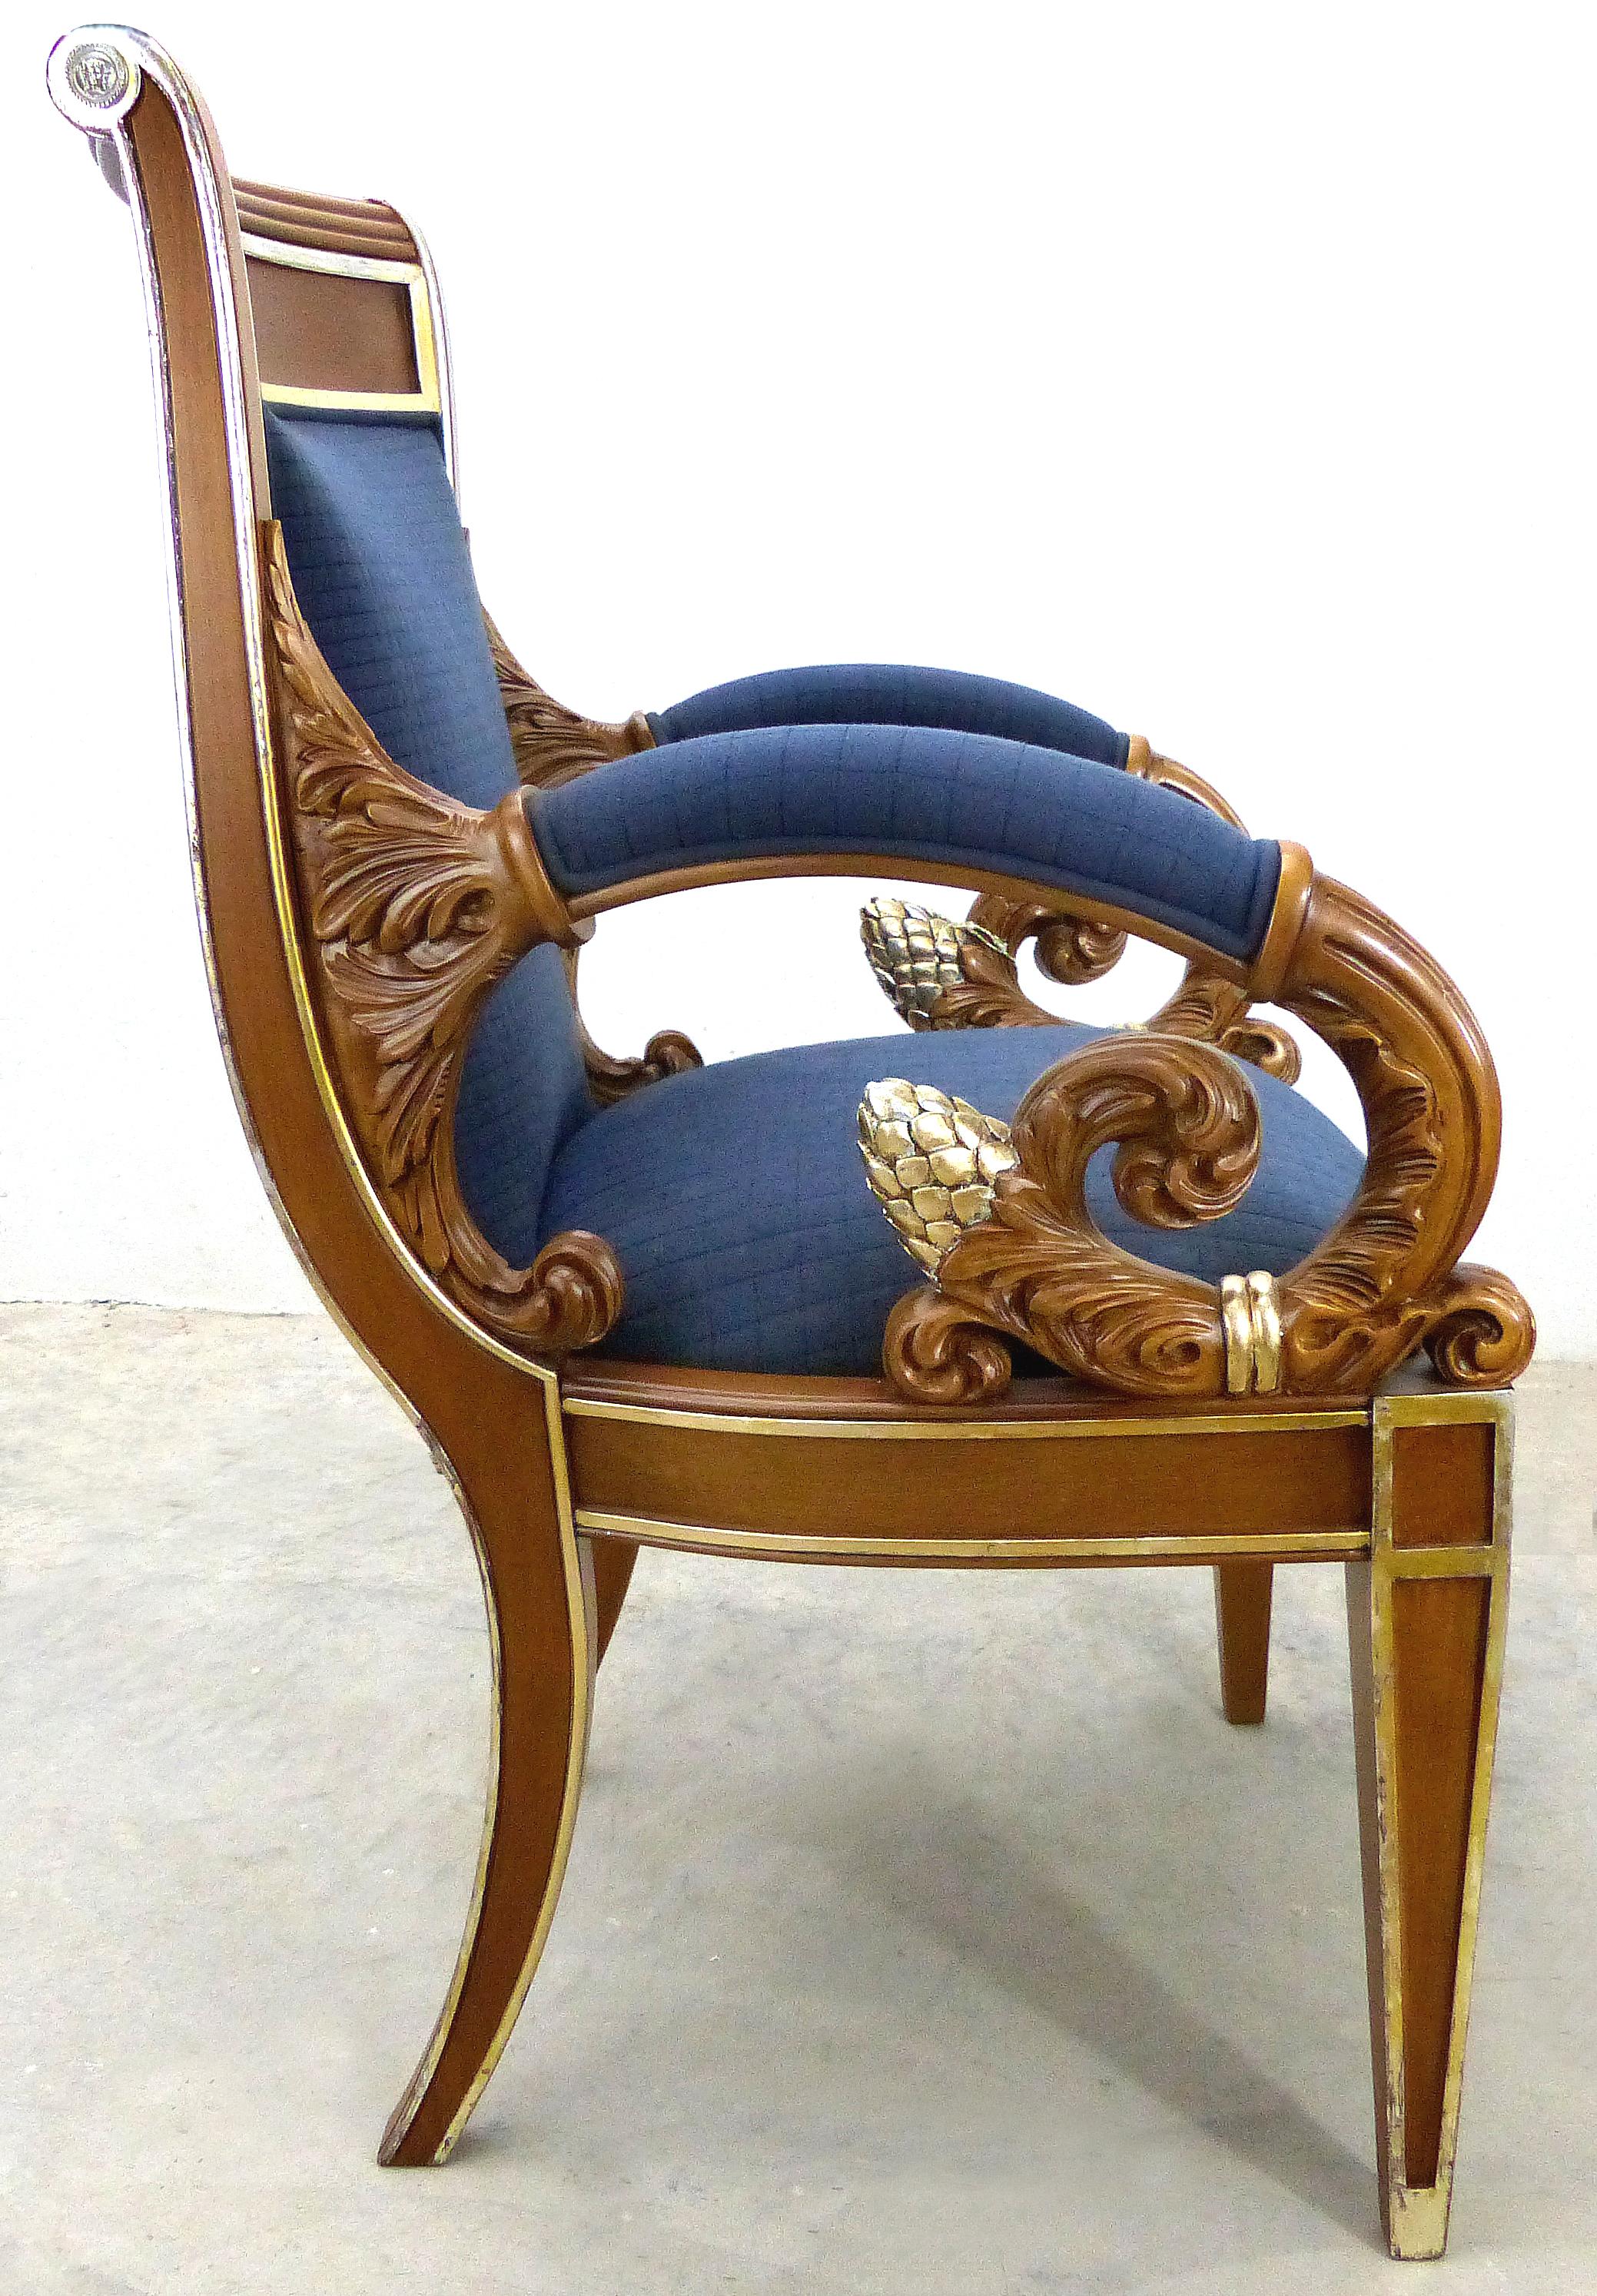 Gianni Versace Vanitas Carved Armchair with a Scrolling Arm and Gilt Details

Offered for sale is a heavily carved armchair designed by Gianni Versace as part of the 1994 collection. The beautifully carved, scrolling arms end in cornucopias with a